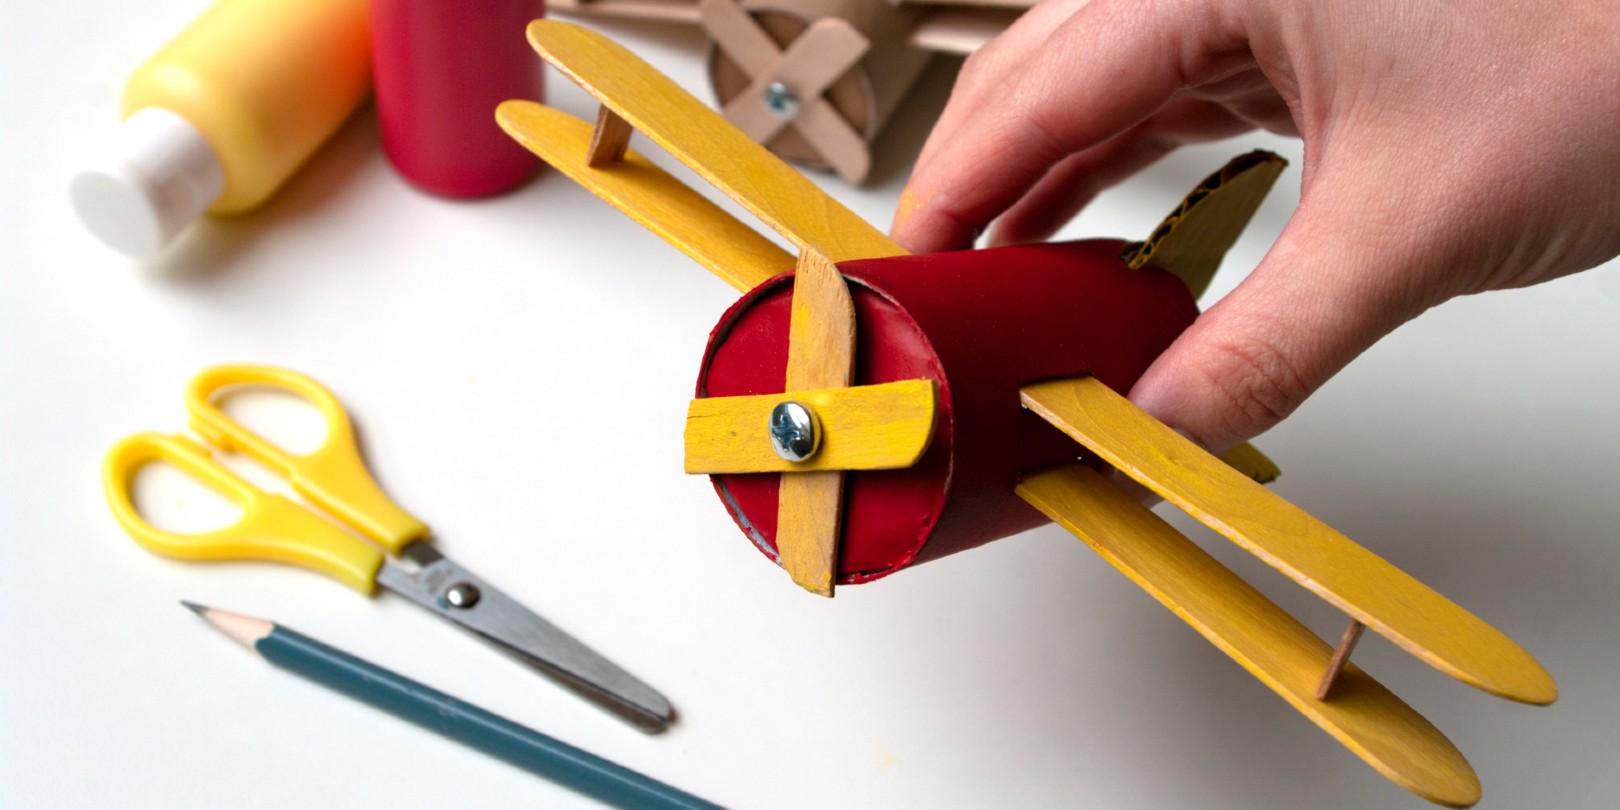 How to make airplane. Hand made toy,zero waste from toilet paper roll and popsicle sticks. Modeling. Step 21 put all details of aircraft together. DIY for child, ideas to make during home quarantine.